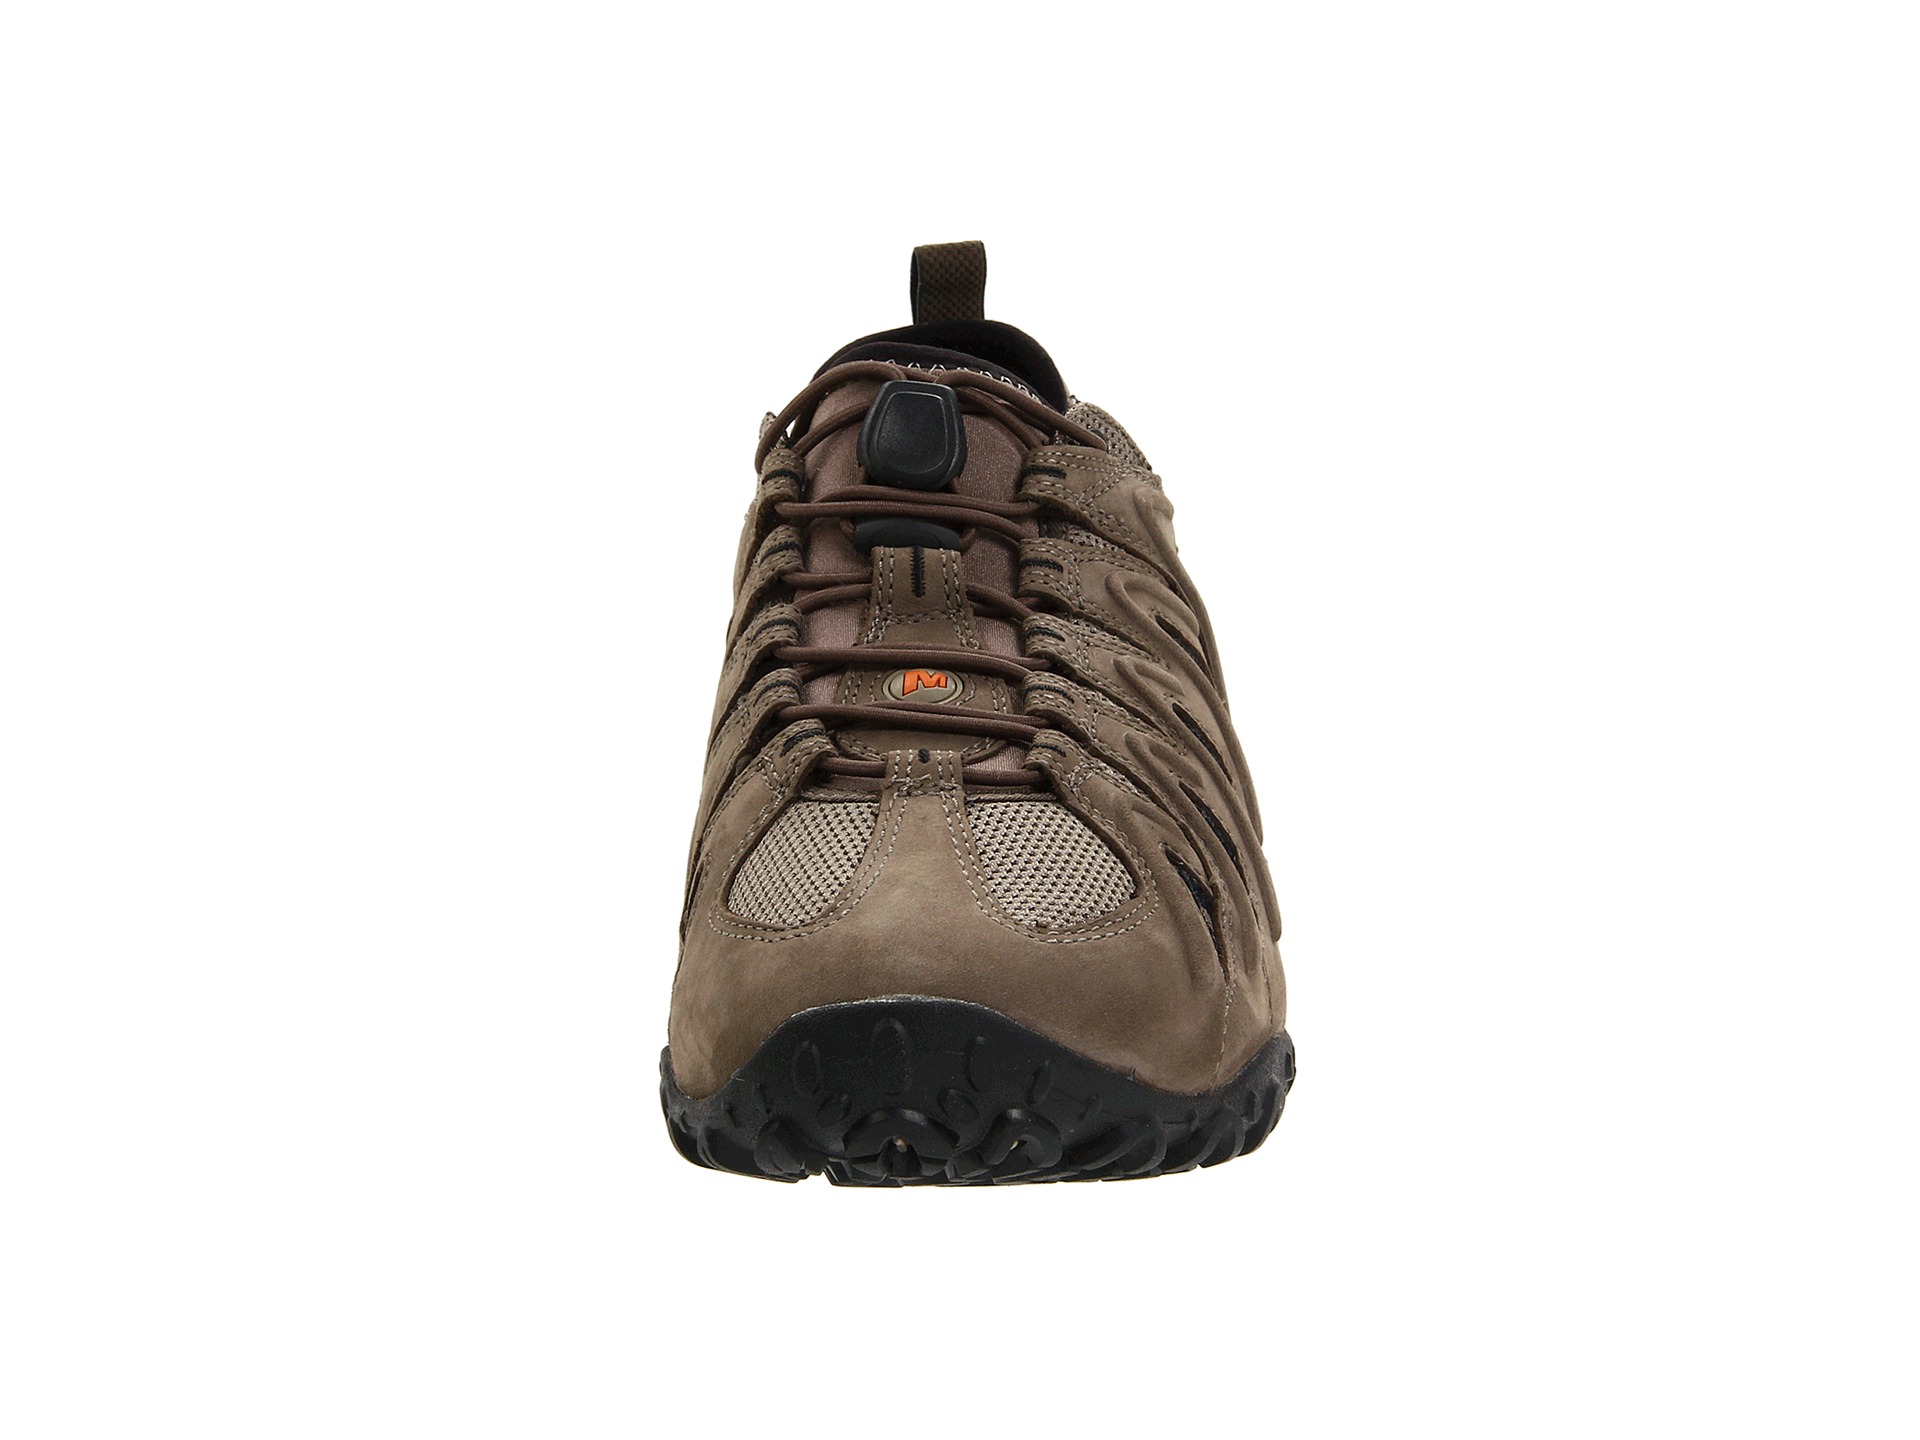 Merrell Chameleon 4 Stretch | Shipped Free at Zappos